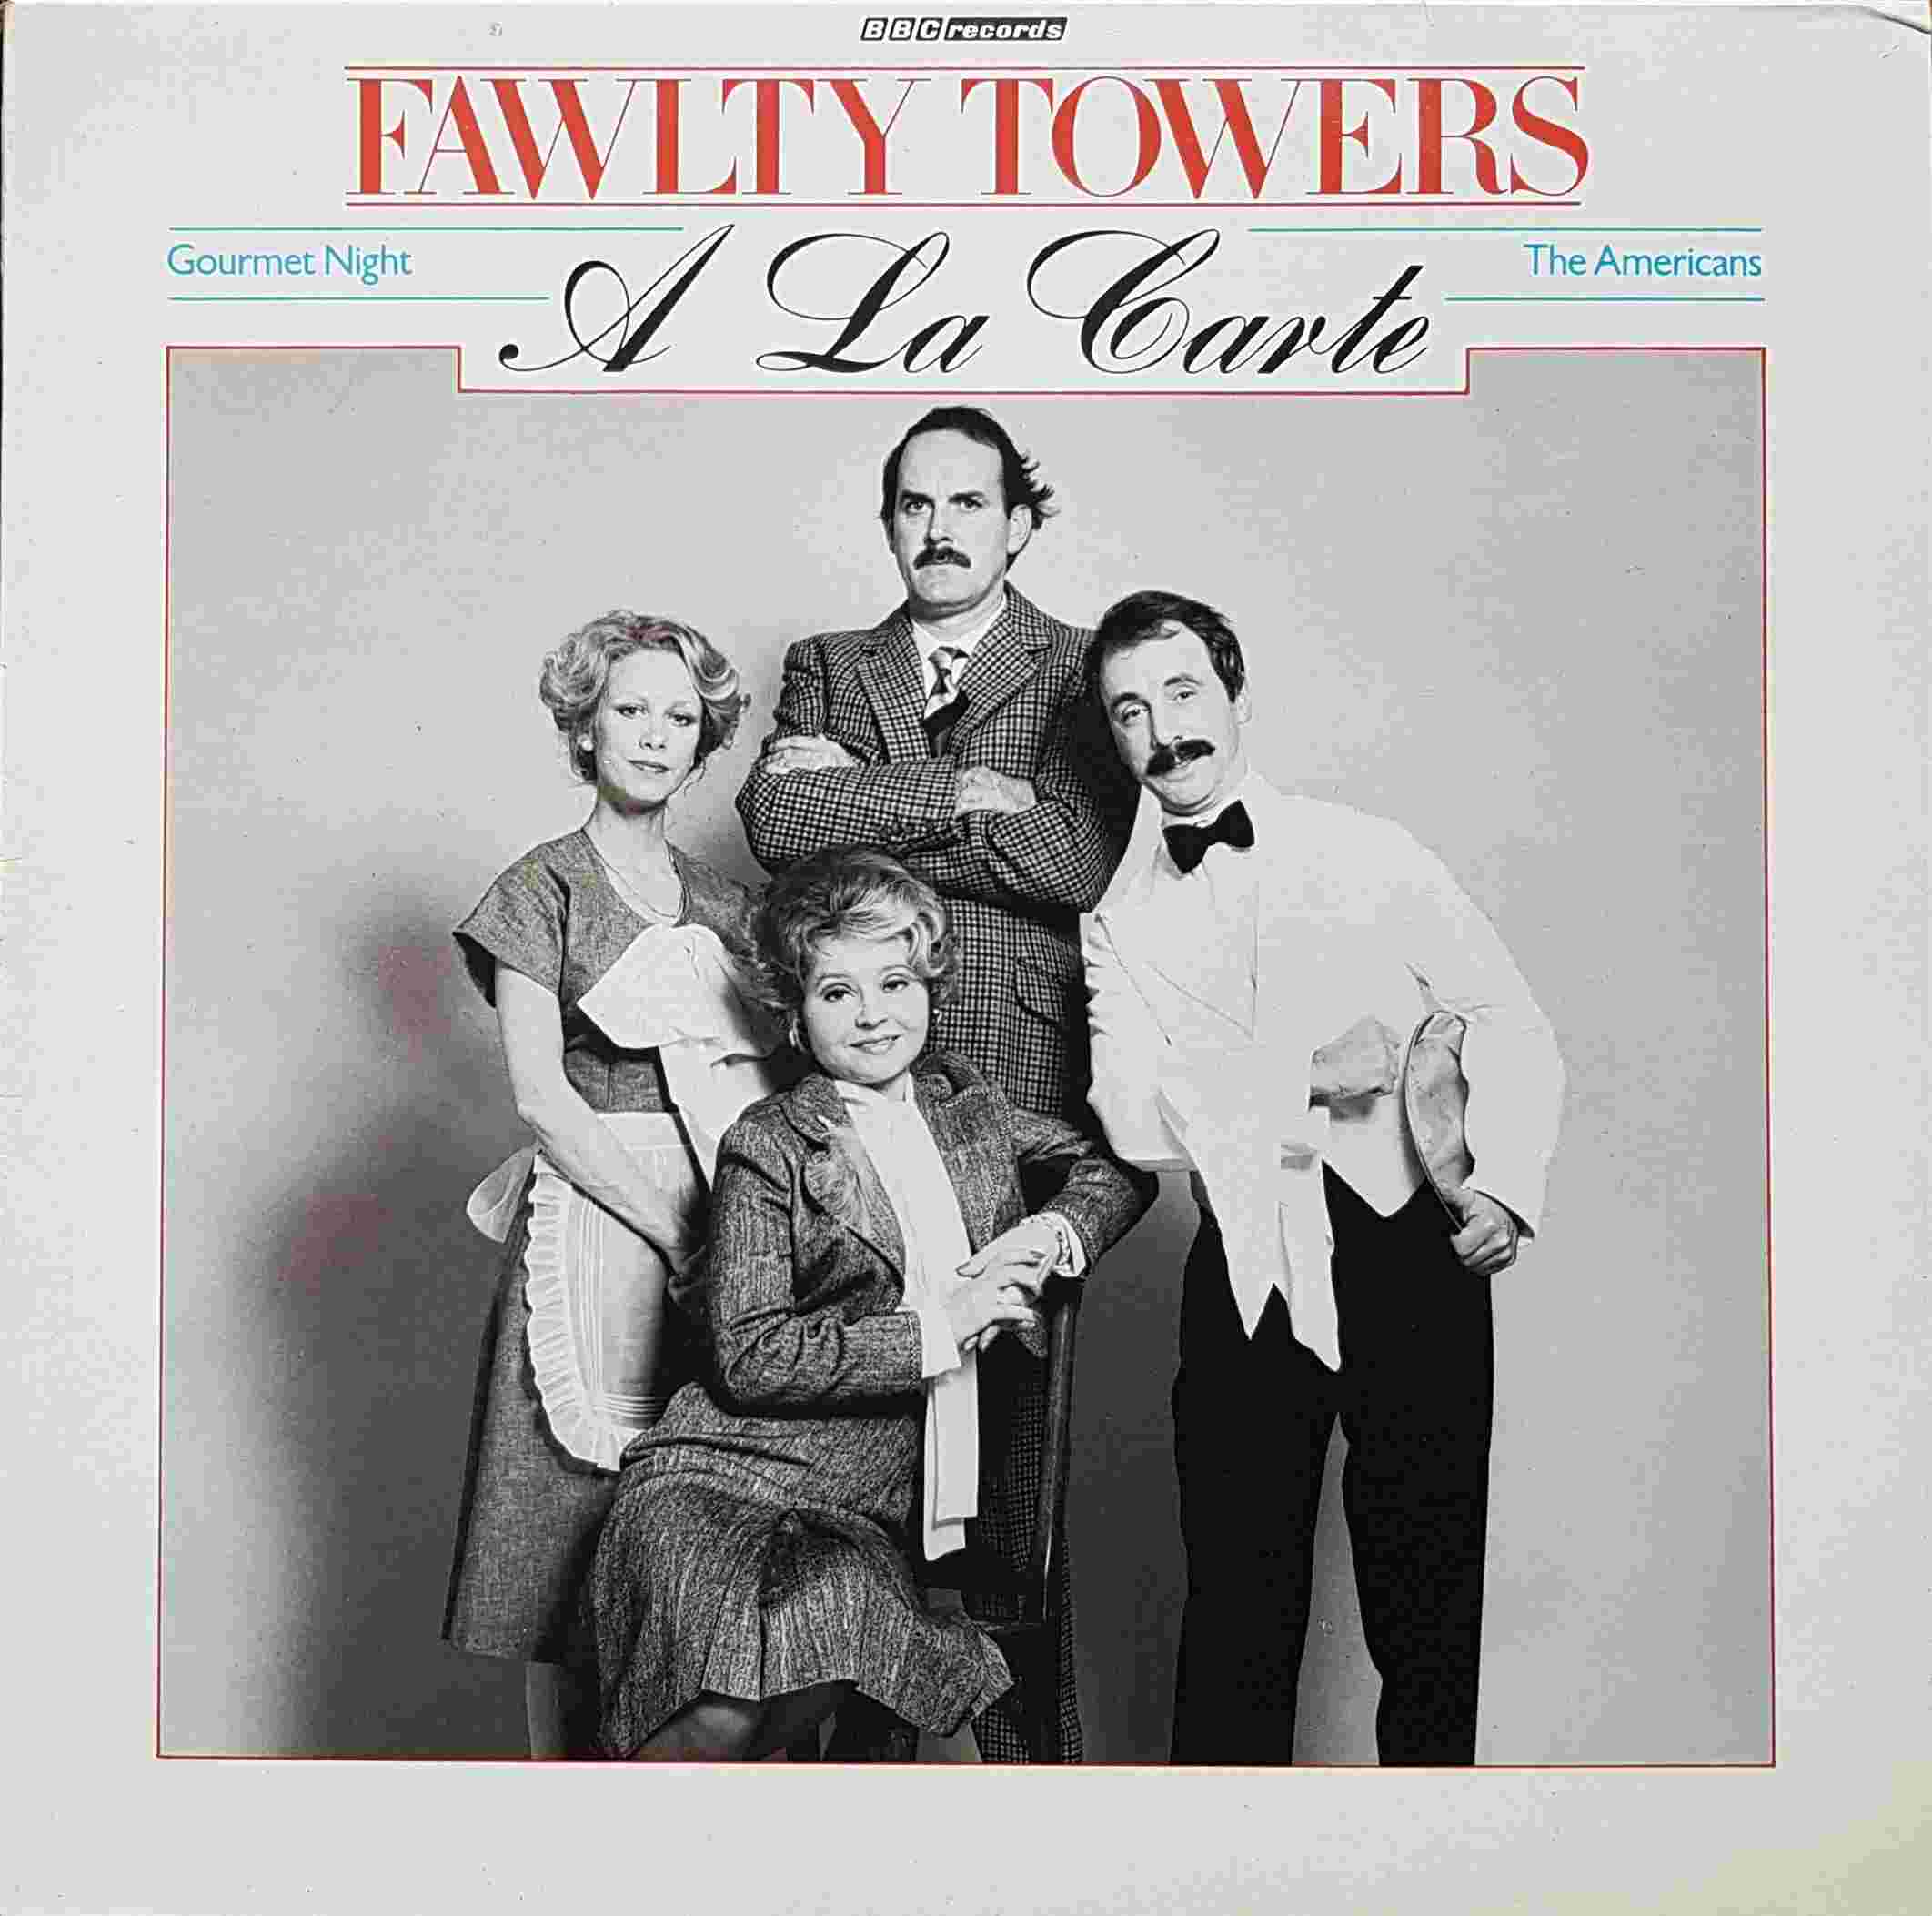 Picture of REB 484 Fawlty Towers - A la carte by artist John Cleese / Connie Booth from the BBC records and Tapes library